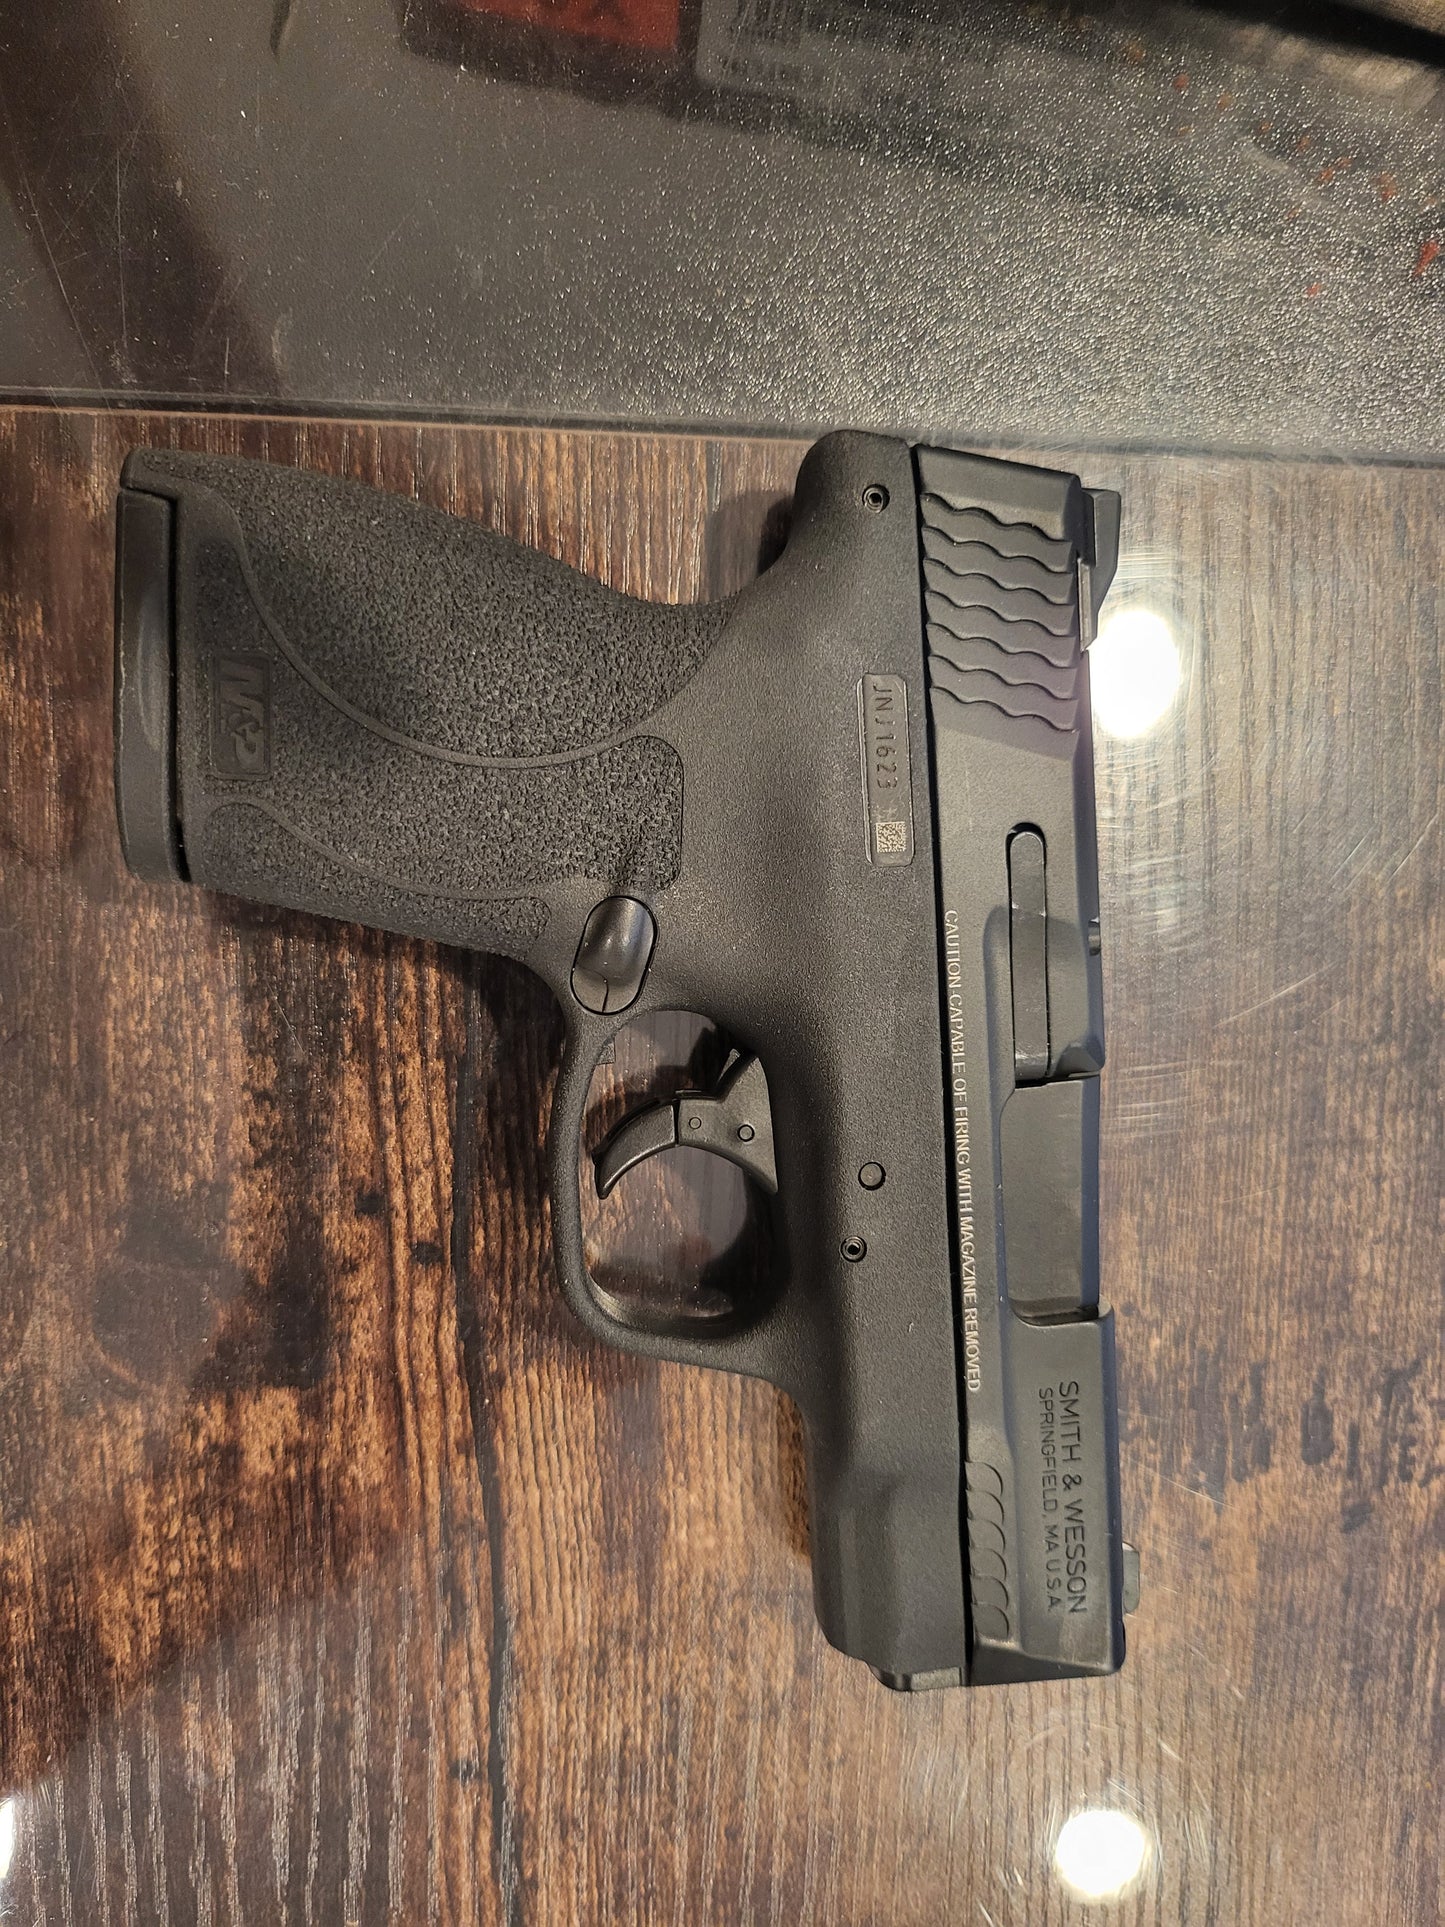 Smith & Wesson M&P45 Shield .45 Auto Pistol with 4x7 ROUND Mags no card fee